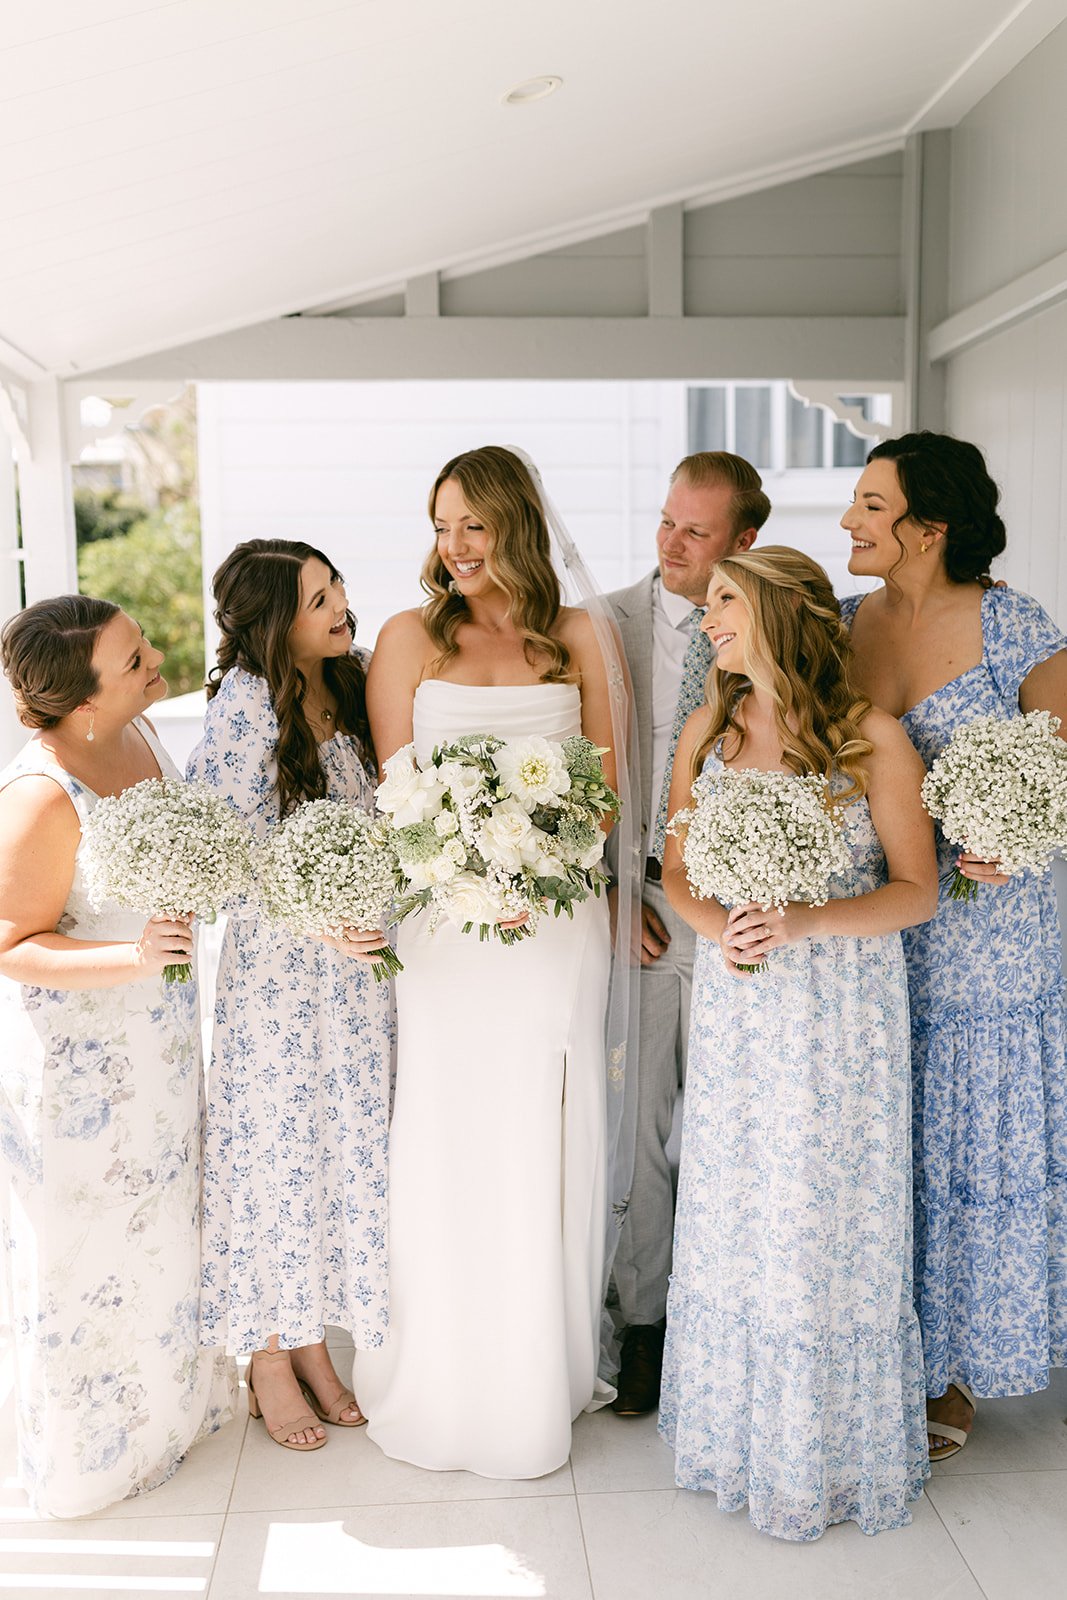 A bride wearing a strapless white dress is surrounded by her bridesmaids and bridesmaid. The girls are wearing mix match blue and white floral dresses